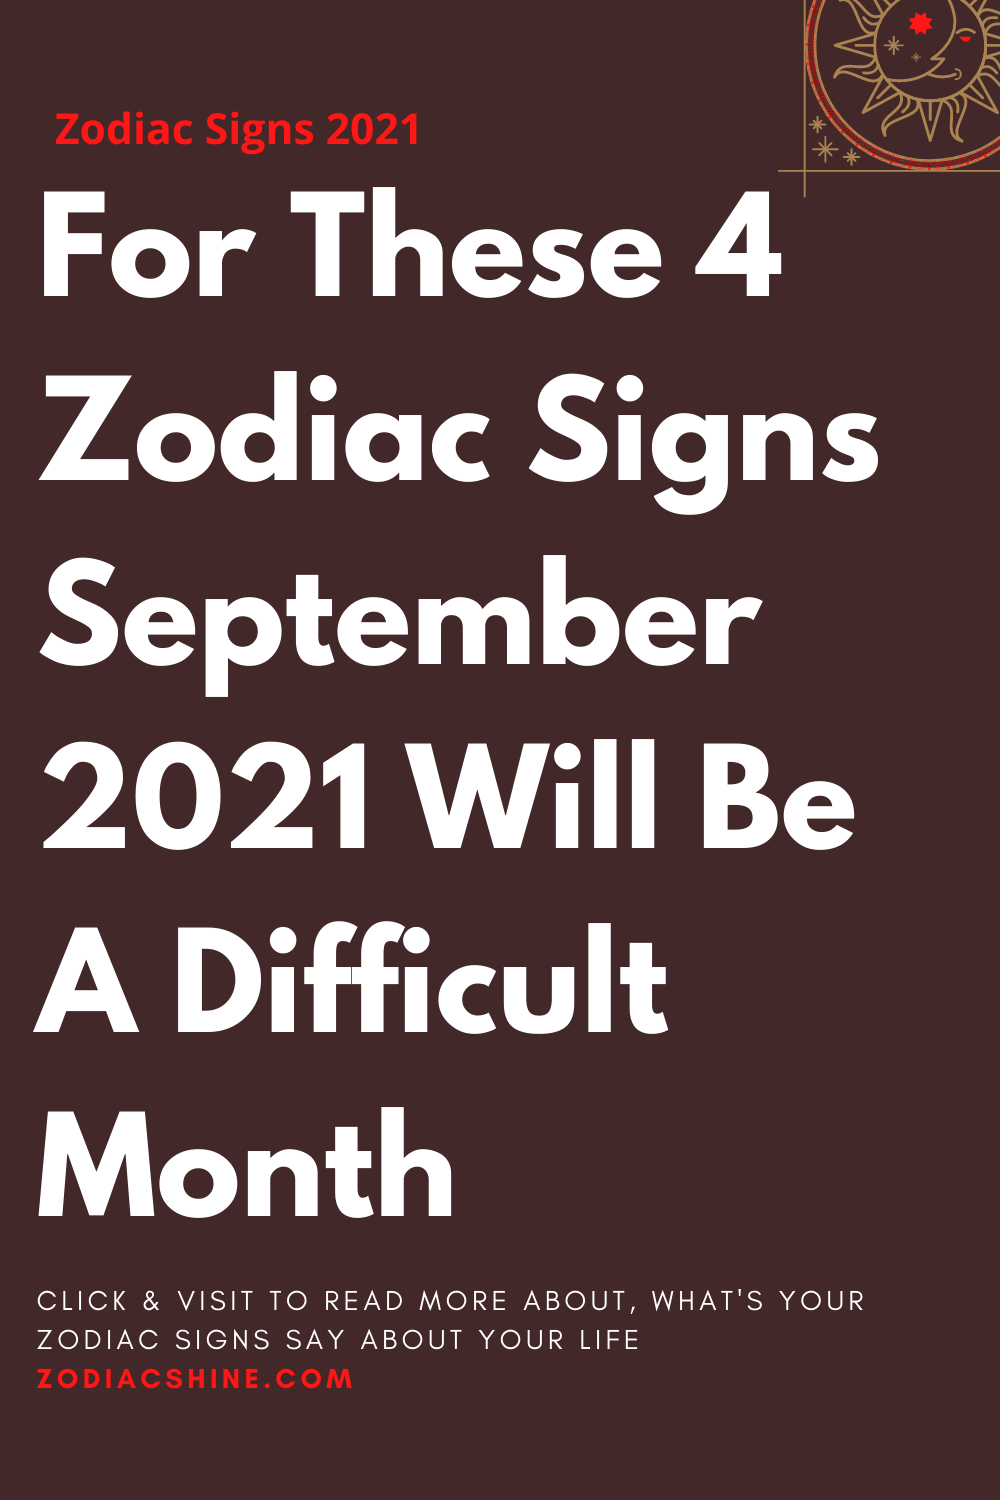 For These 4 Zodiac Signs September 2021 Will Be A Difficult Month